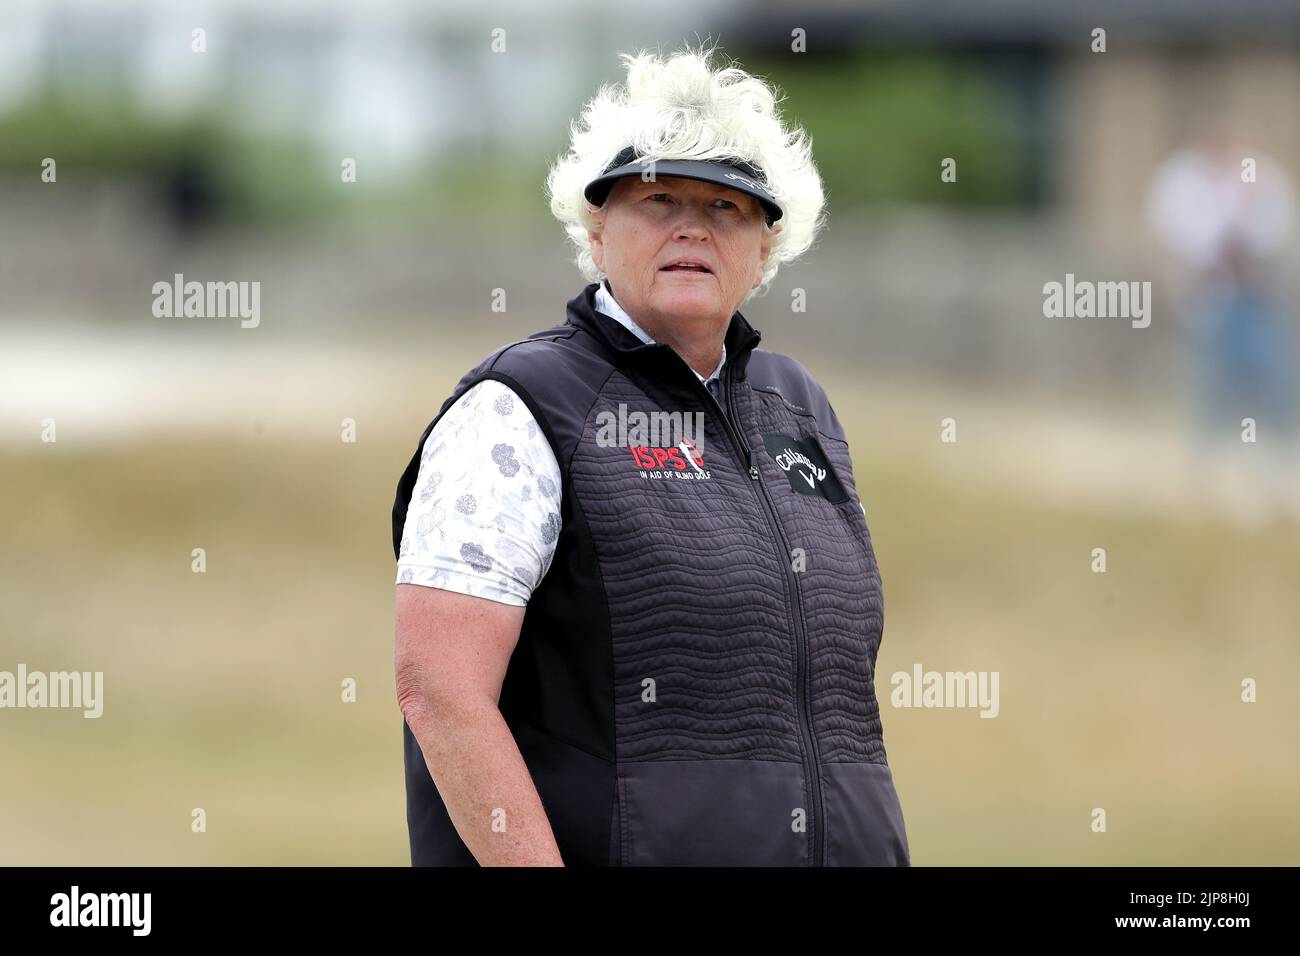 File photo dated 11-07-2022 of Dame Laura Davies. Dame Laura Davies, Anna Nordqvist and Caroline Martens have been named as the European vice-captains for the 2023 Solheim Cup. Issue date: Tuesday August 16, 2022. Stock Photo